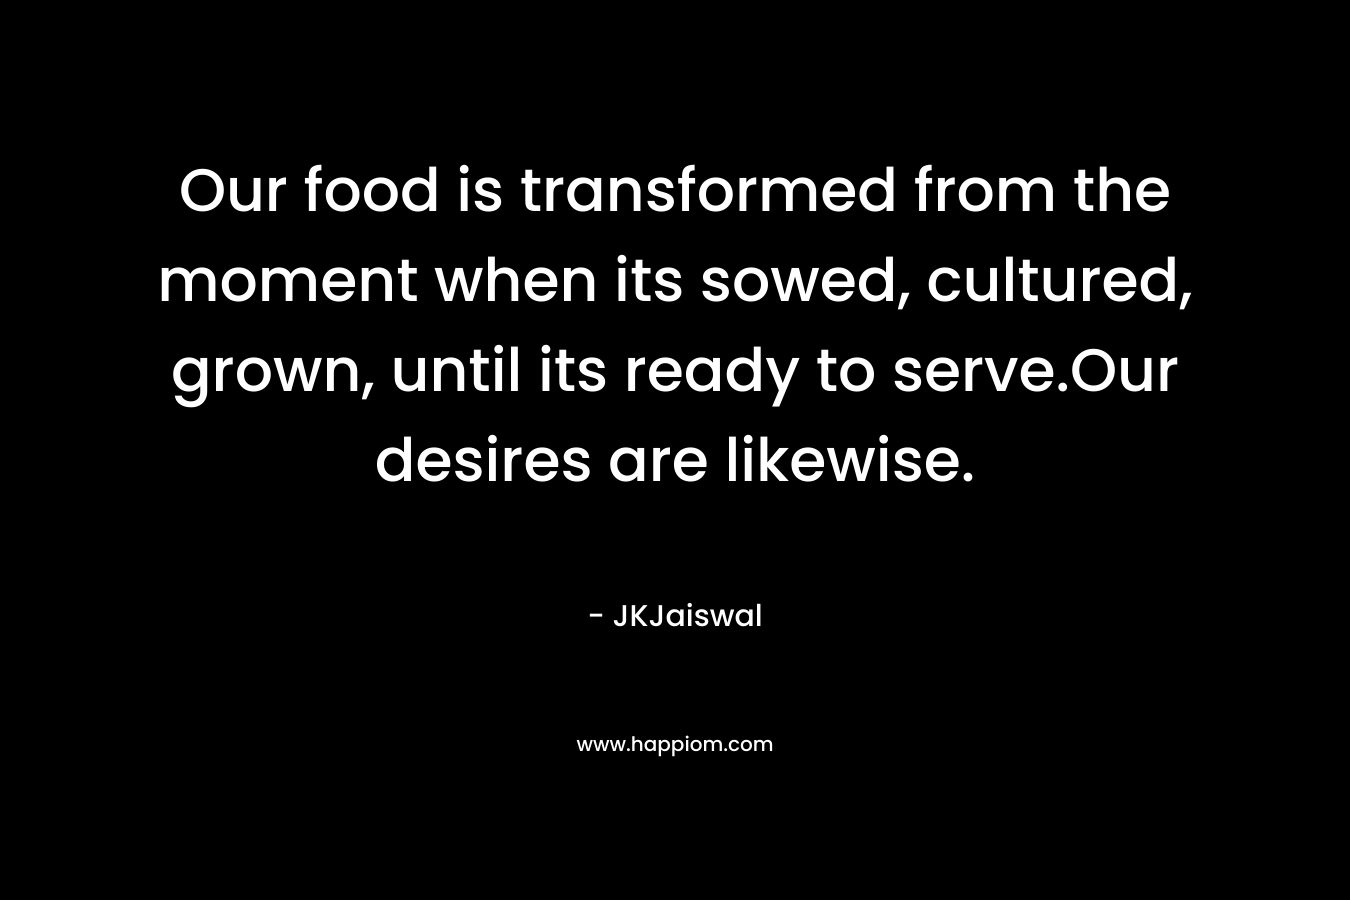 Our food is transformed from the moment when its sowed, cultured, grown, until its ready to serve.Our desires are likewise.